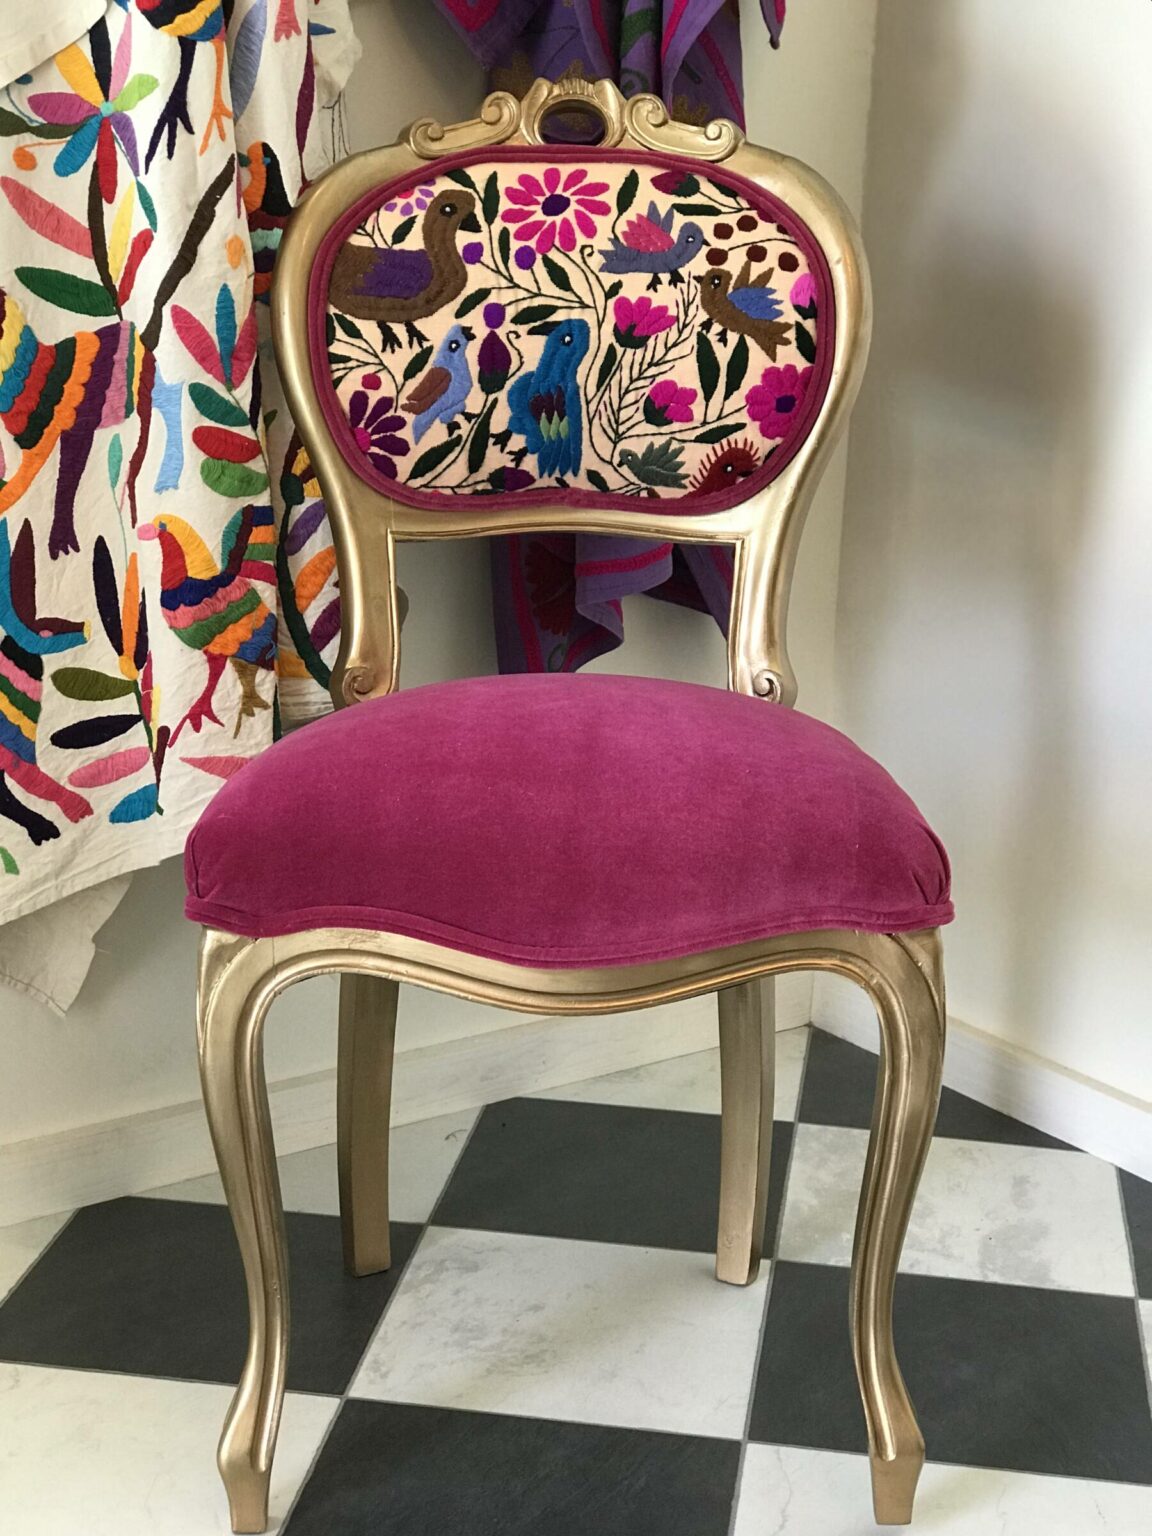 I Love Chair Makeovers - Chair Whimsy